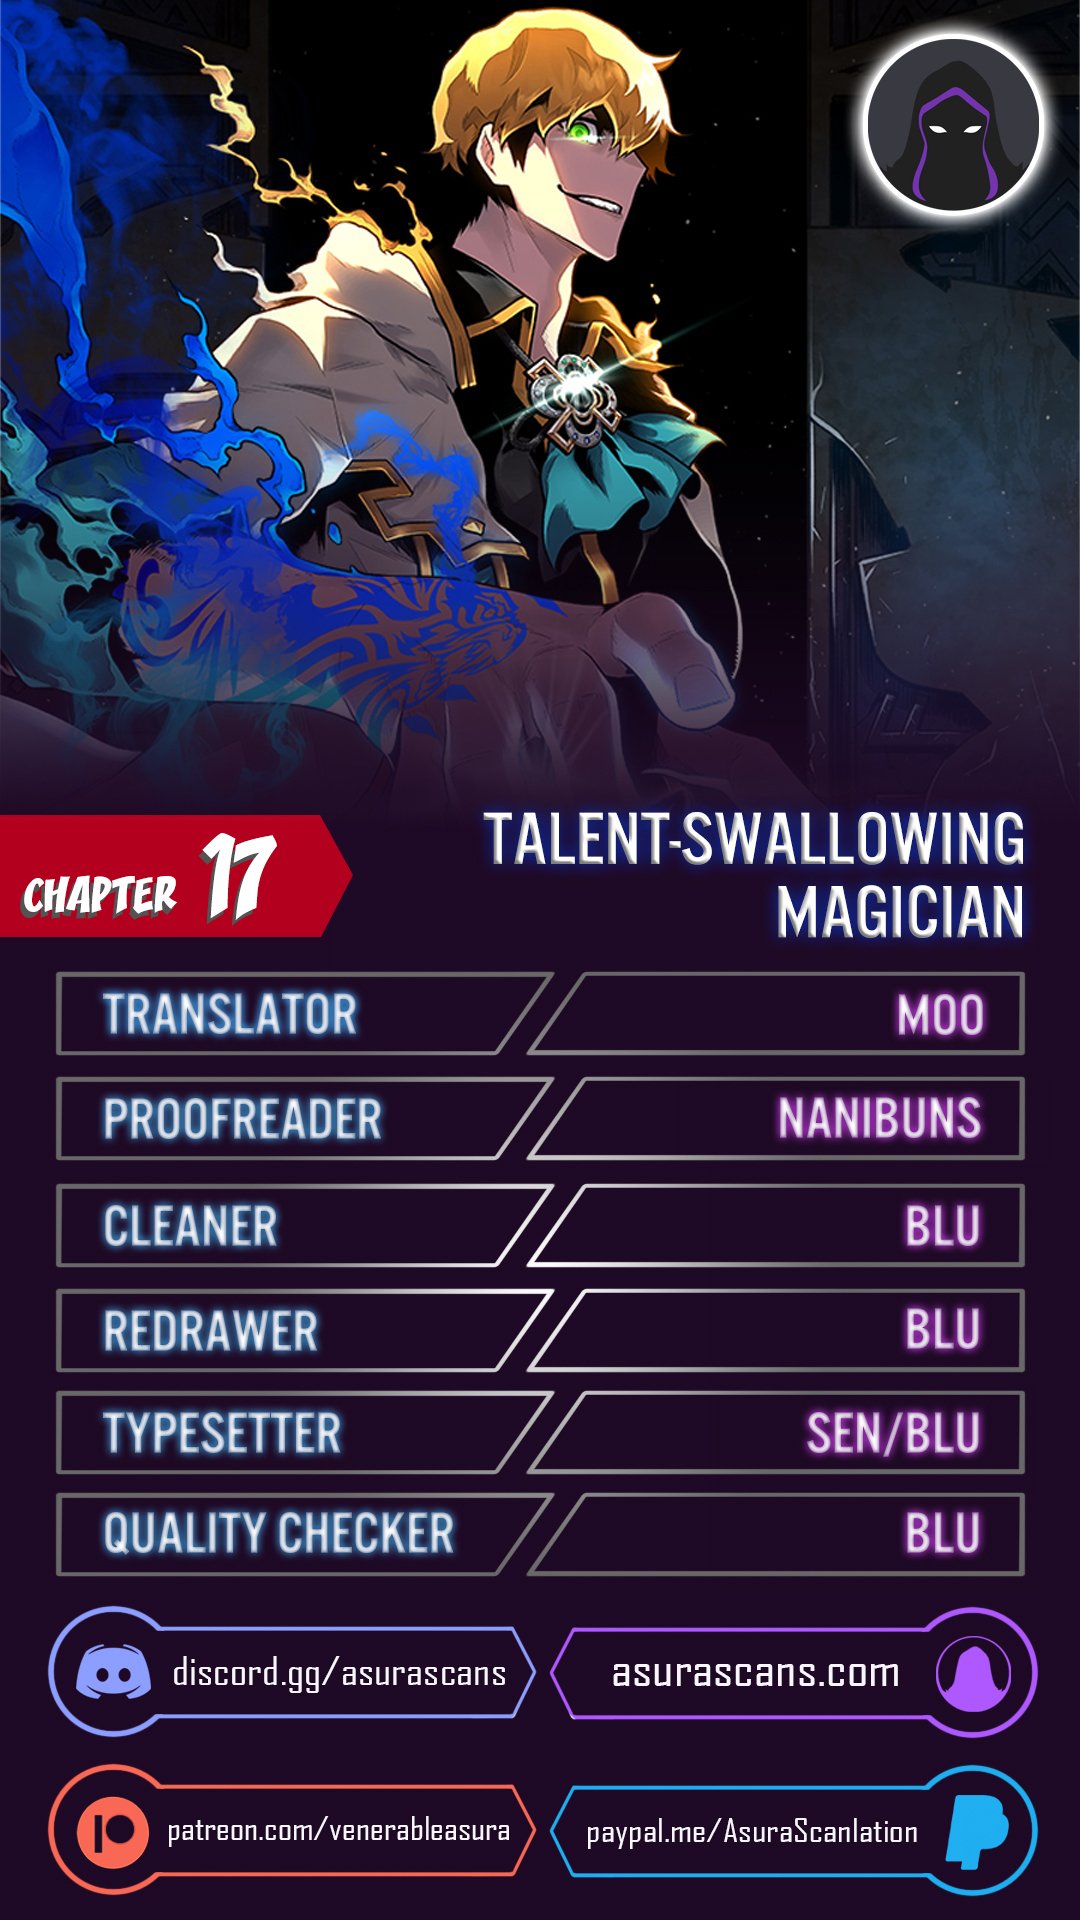 Talent-Swallowing Magician - Chapter 15415 - Image 1